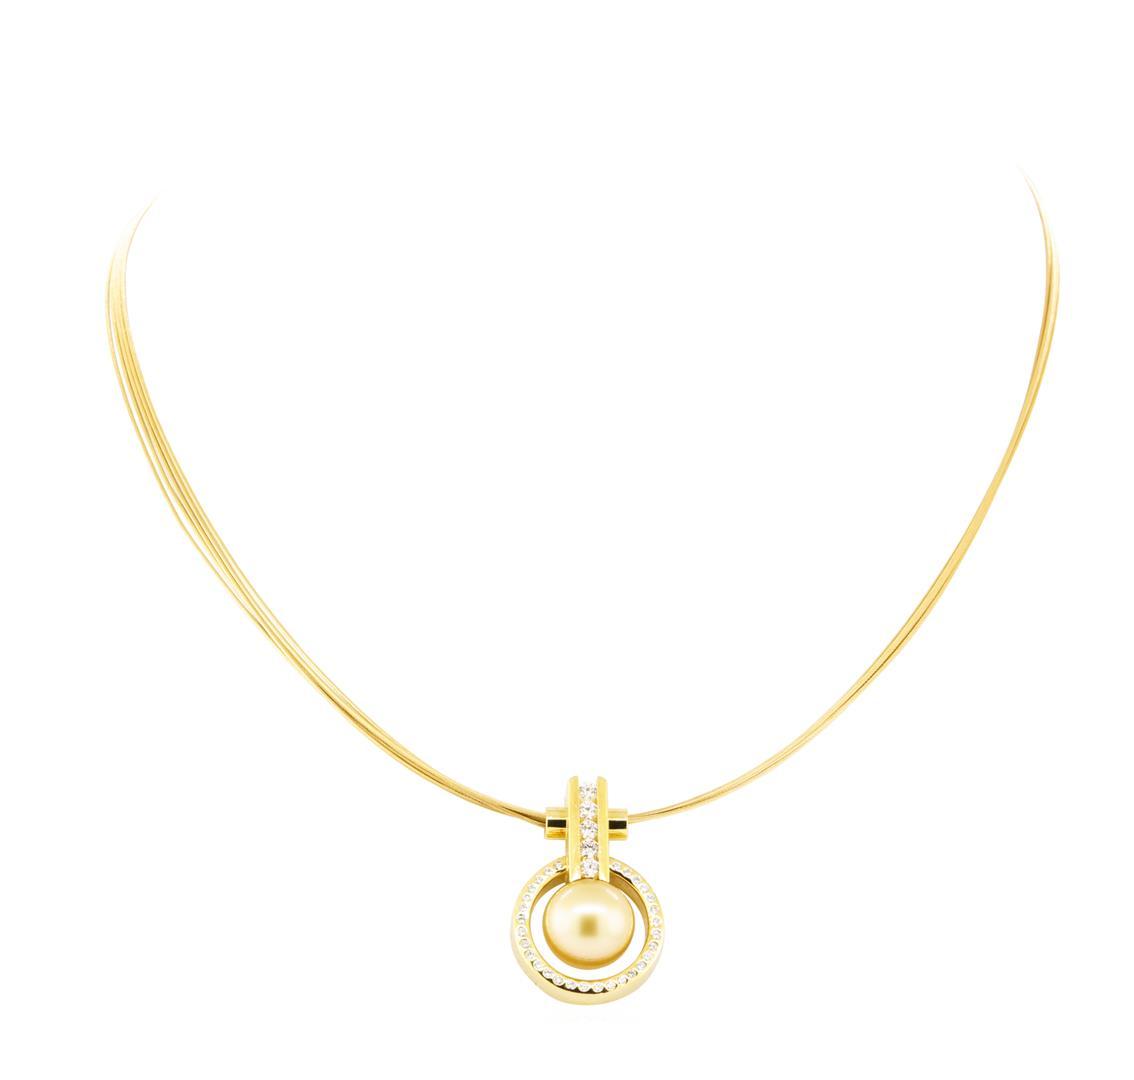 0.61 ctw Diamond and Pearl Pendant And Chain - 18KT Yellow Gold